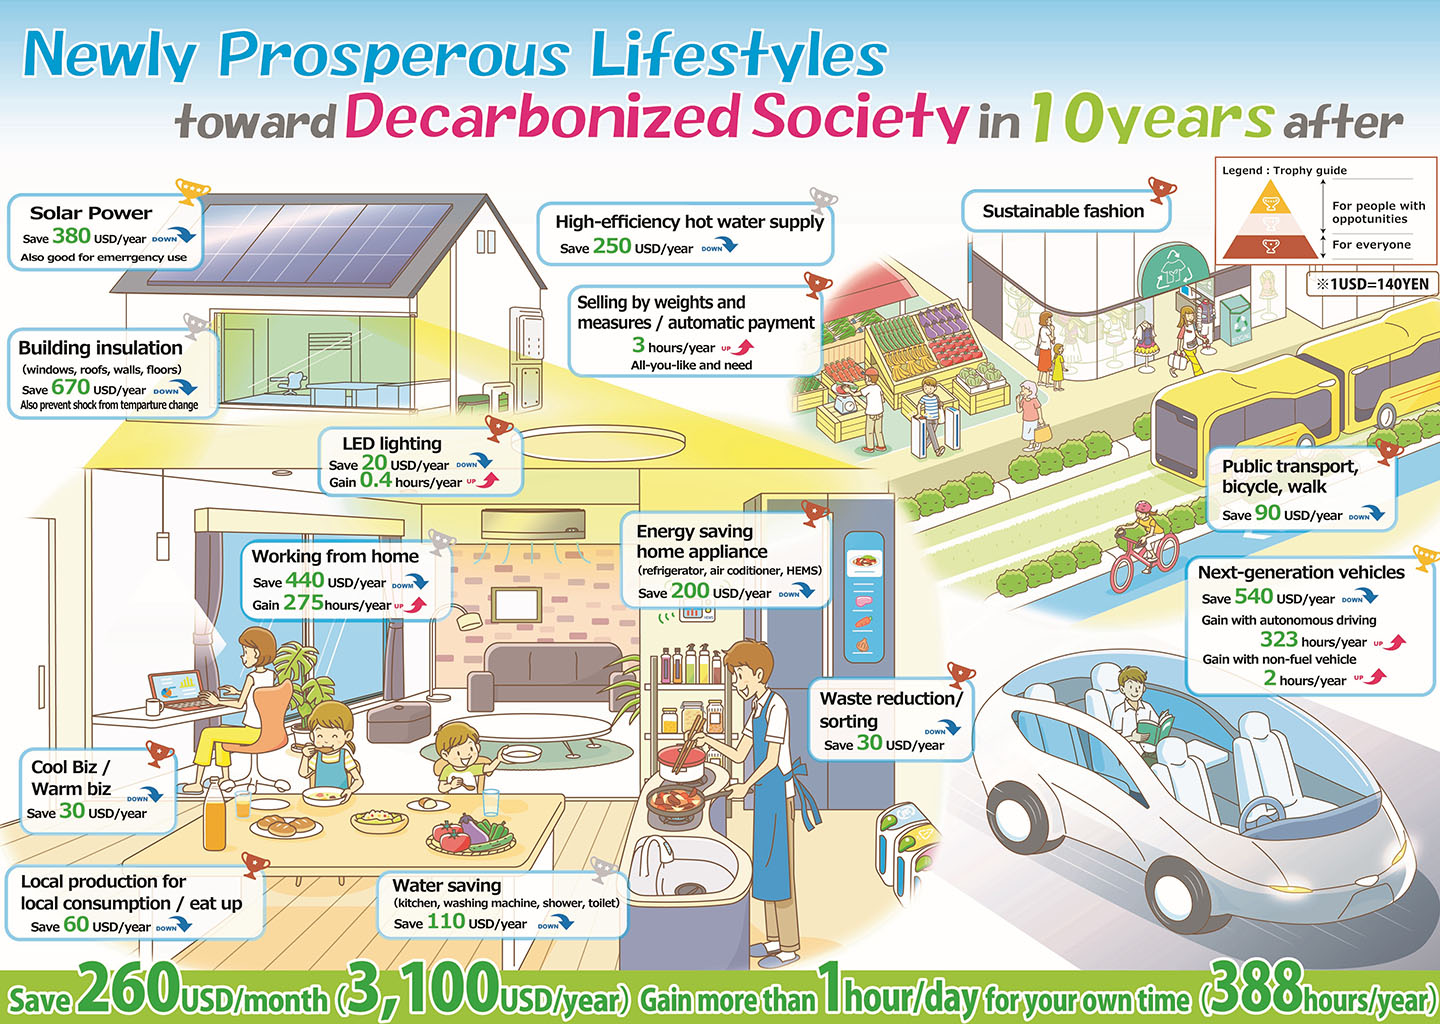 Image of Newly Prosperous Lifestyles toward Decarbonized Society in 10 years after